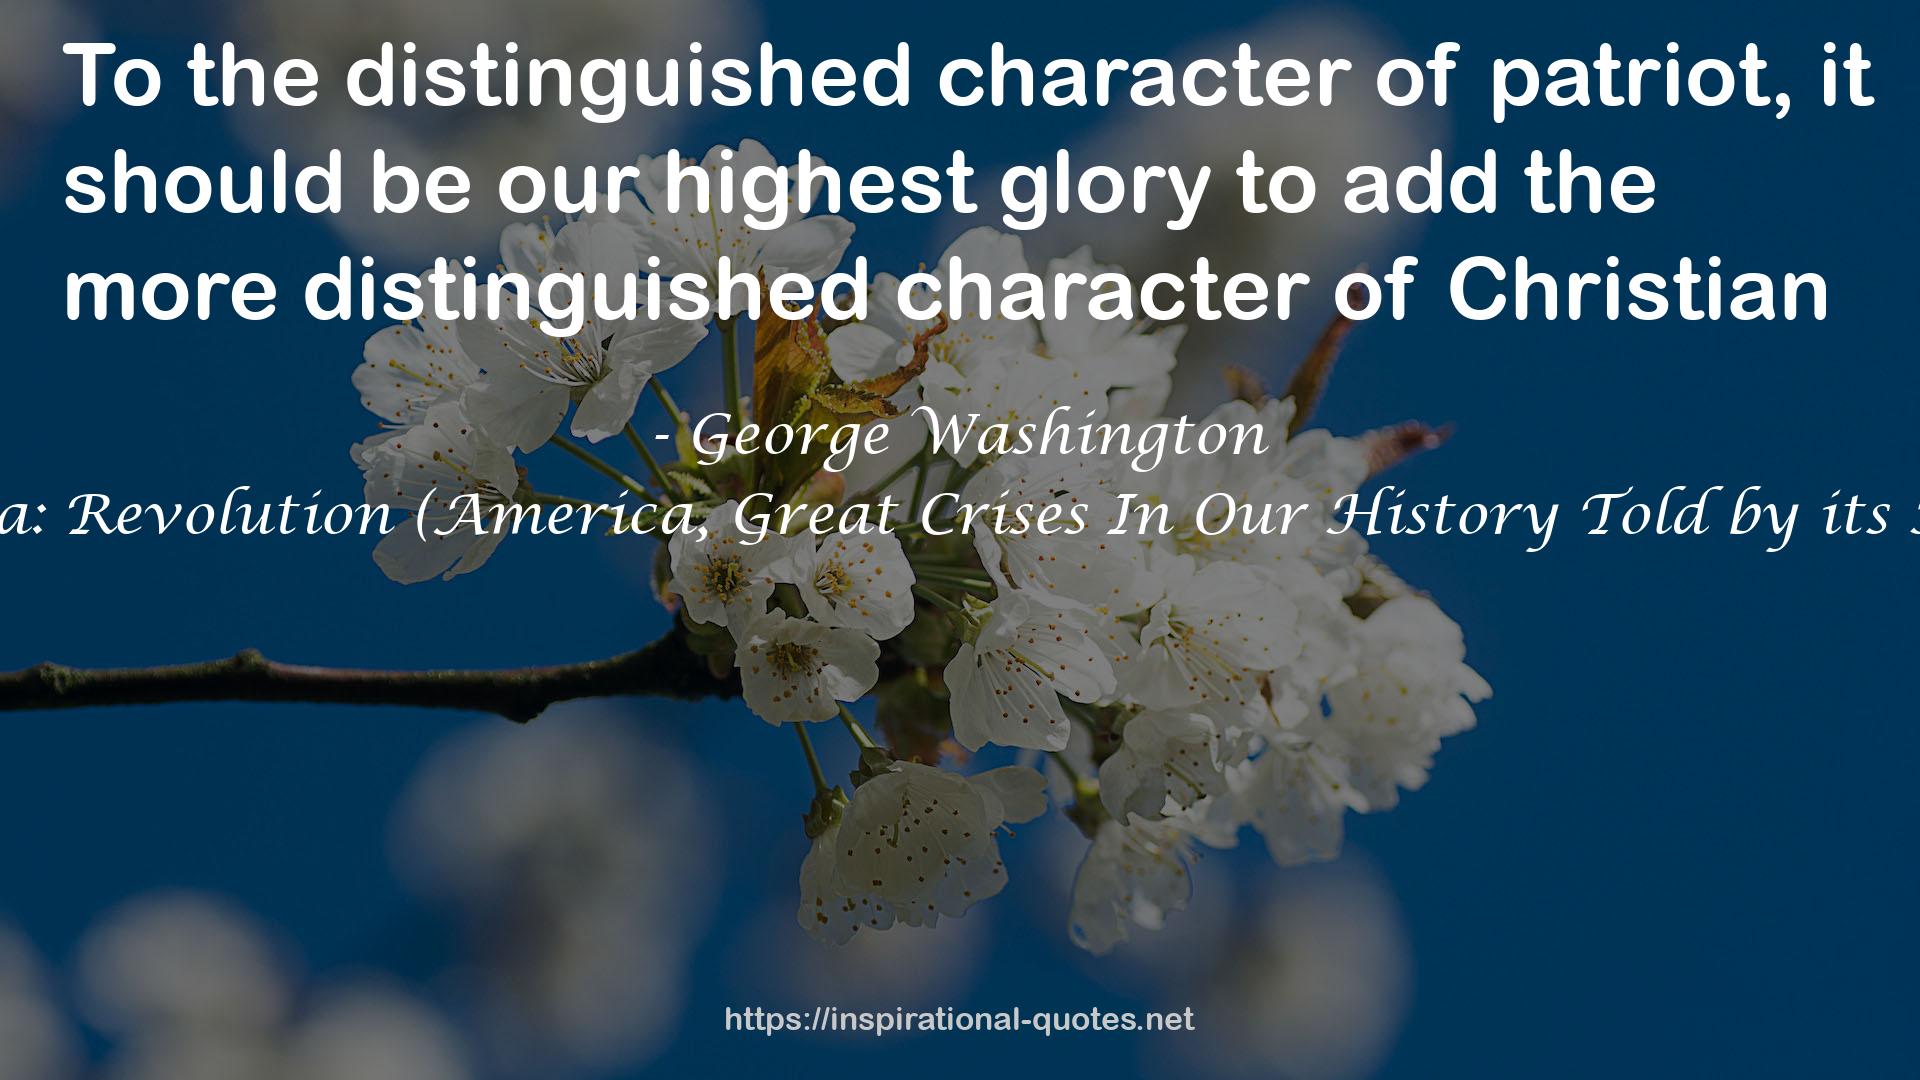 America: Revolution (America, Great Crises In Our History Told by its Makers) QUOTES